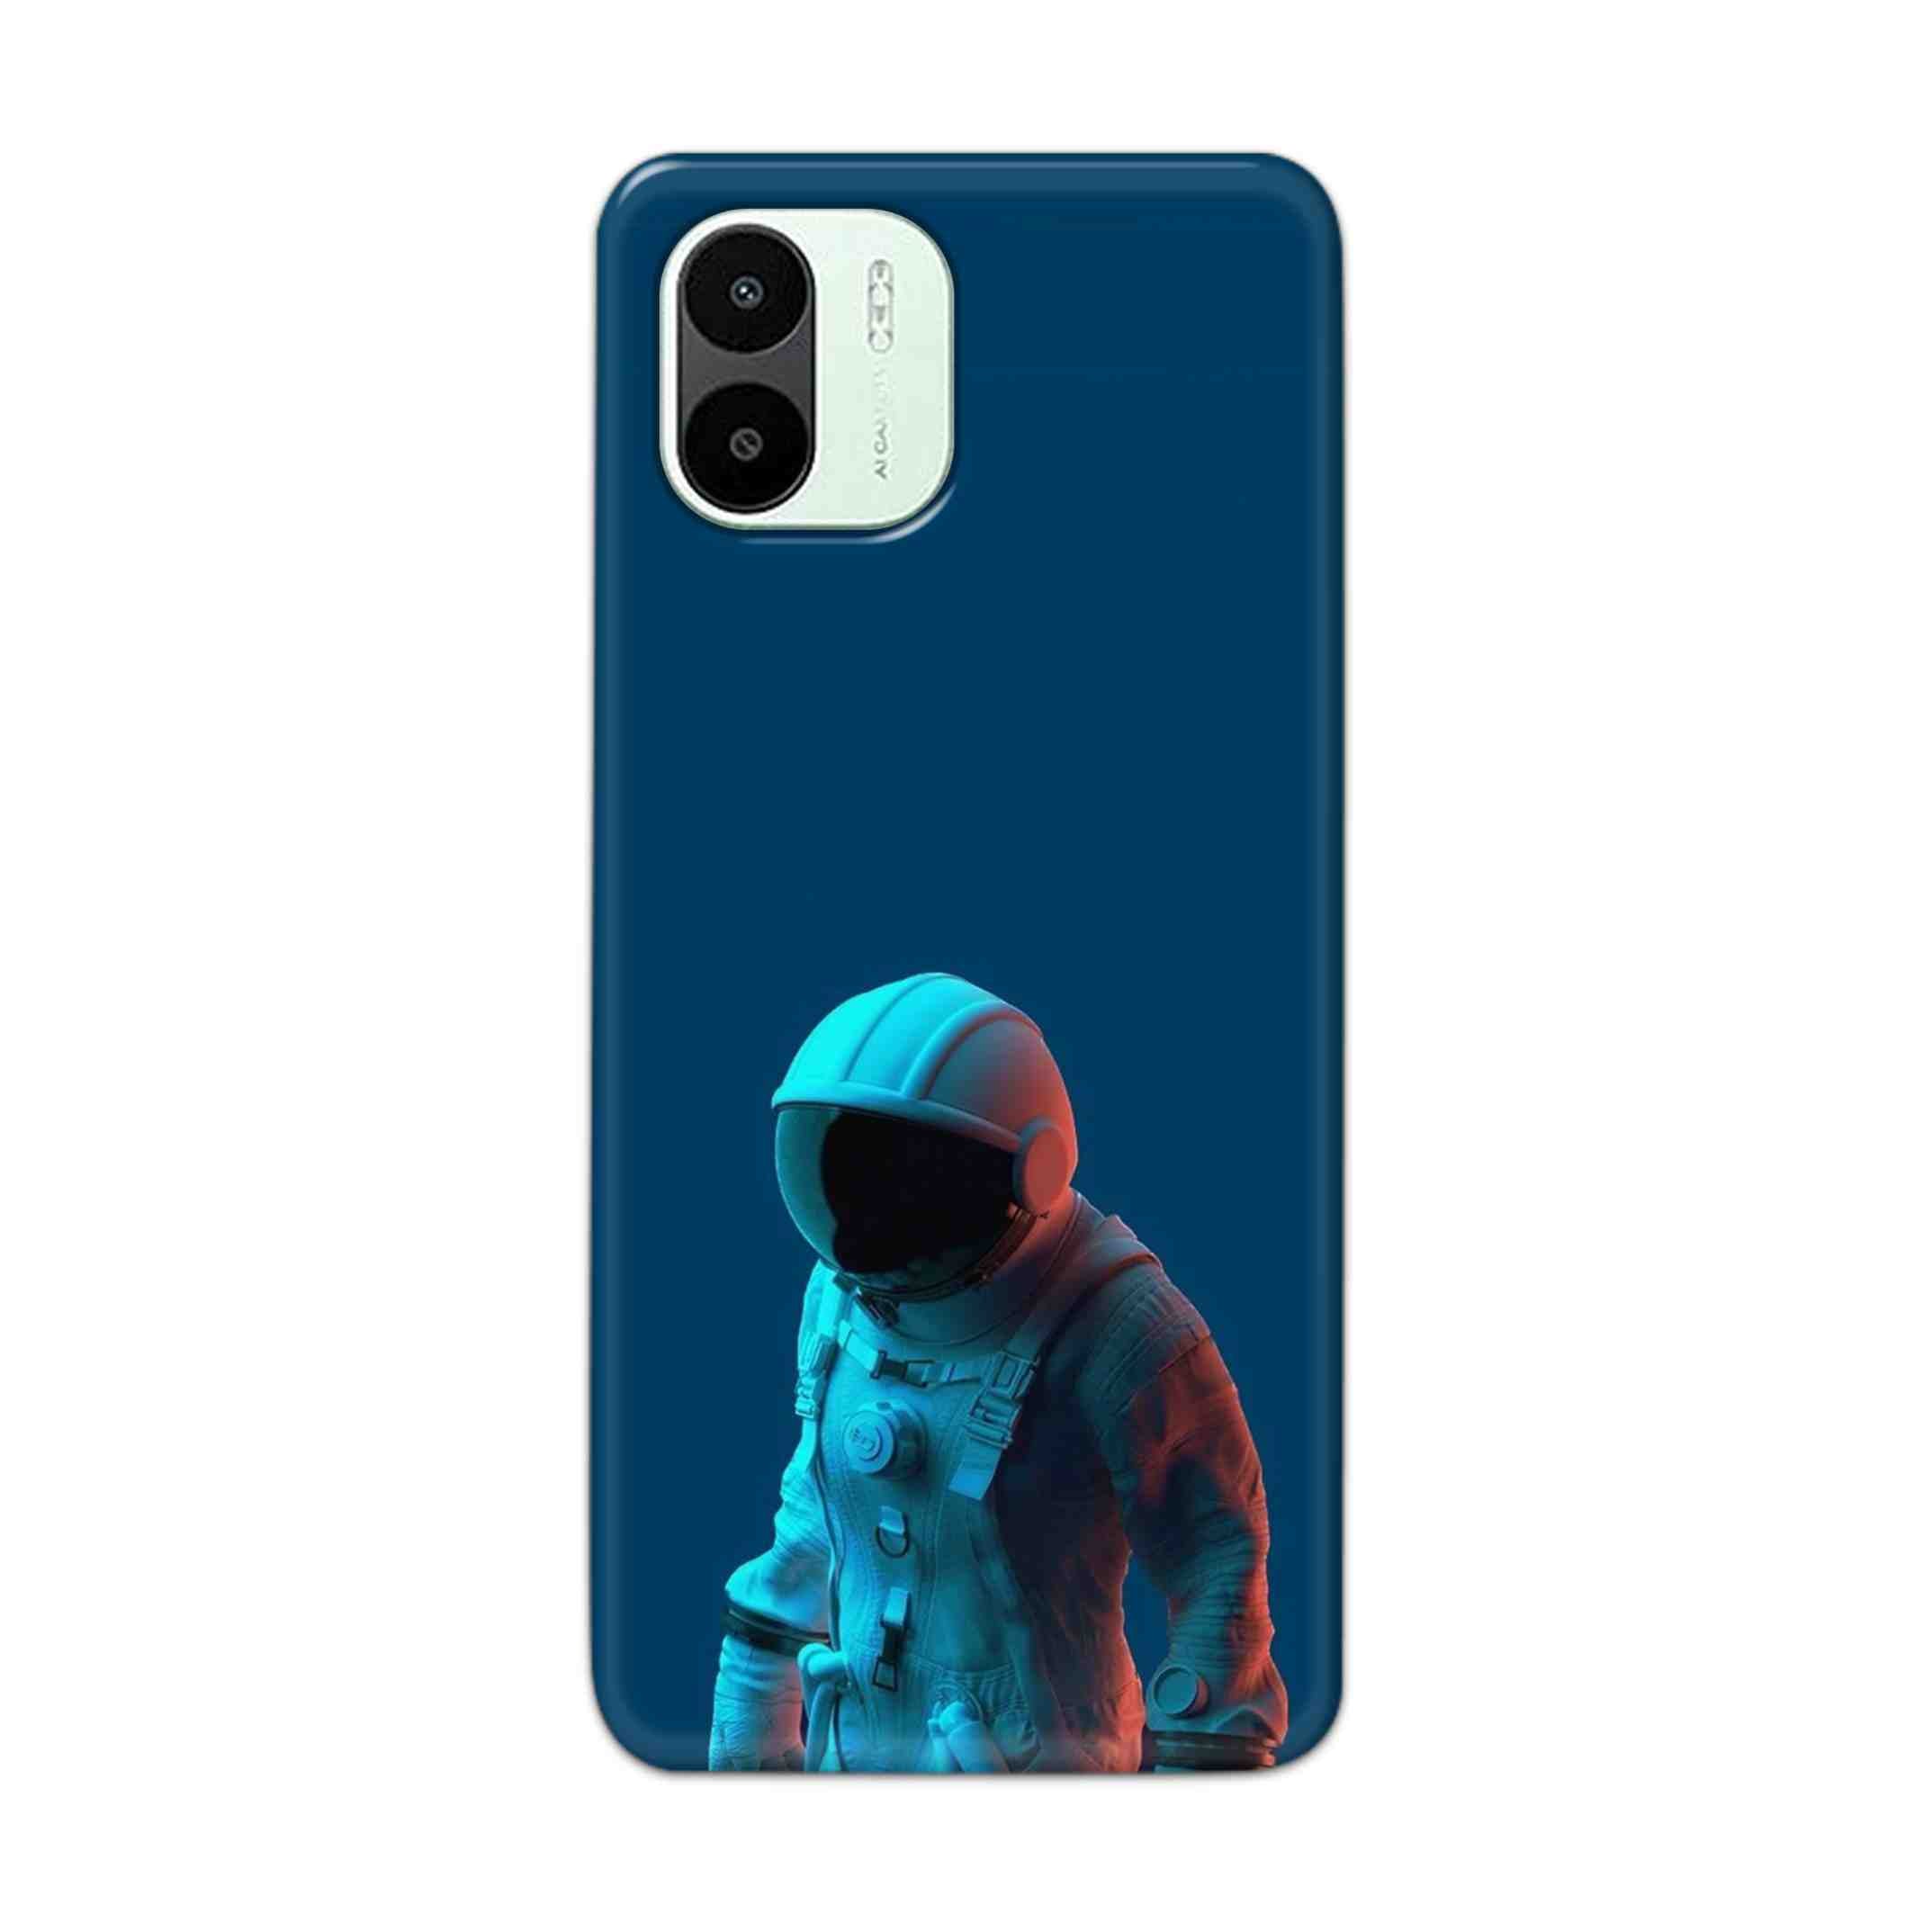 Buy Blue Astronaut Hard Back Mobile Phone Case Cover For Xiaomi Redmi A1 5G Online